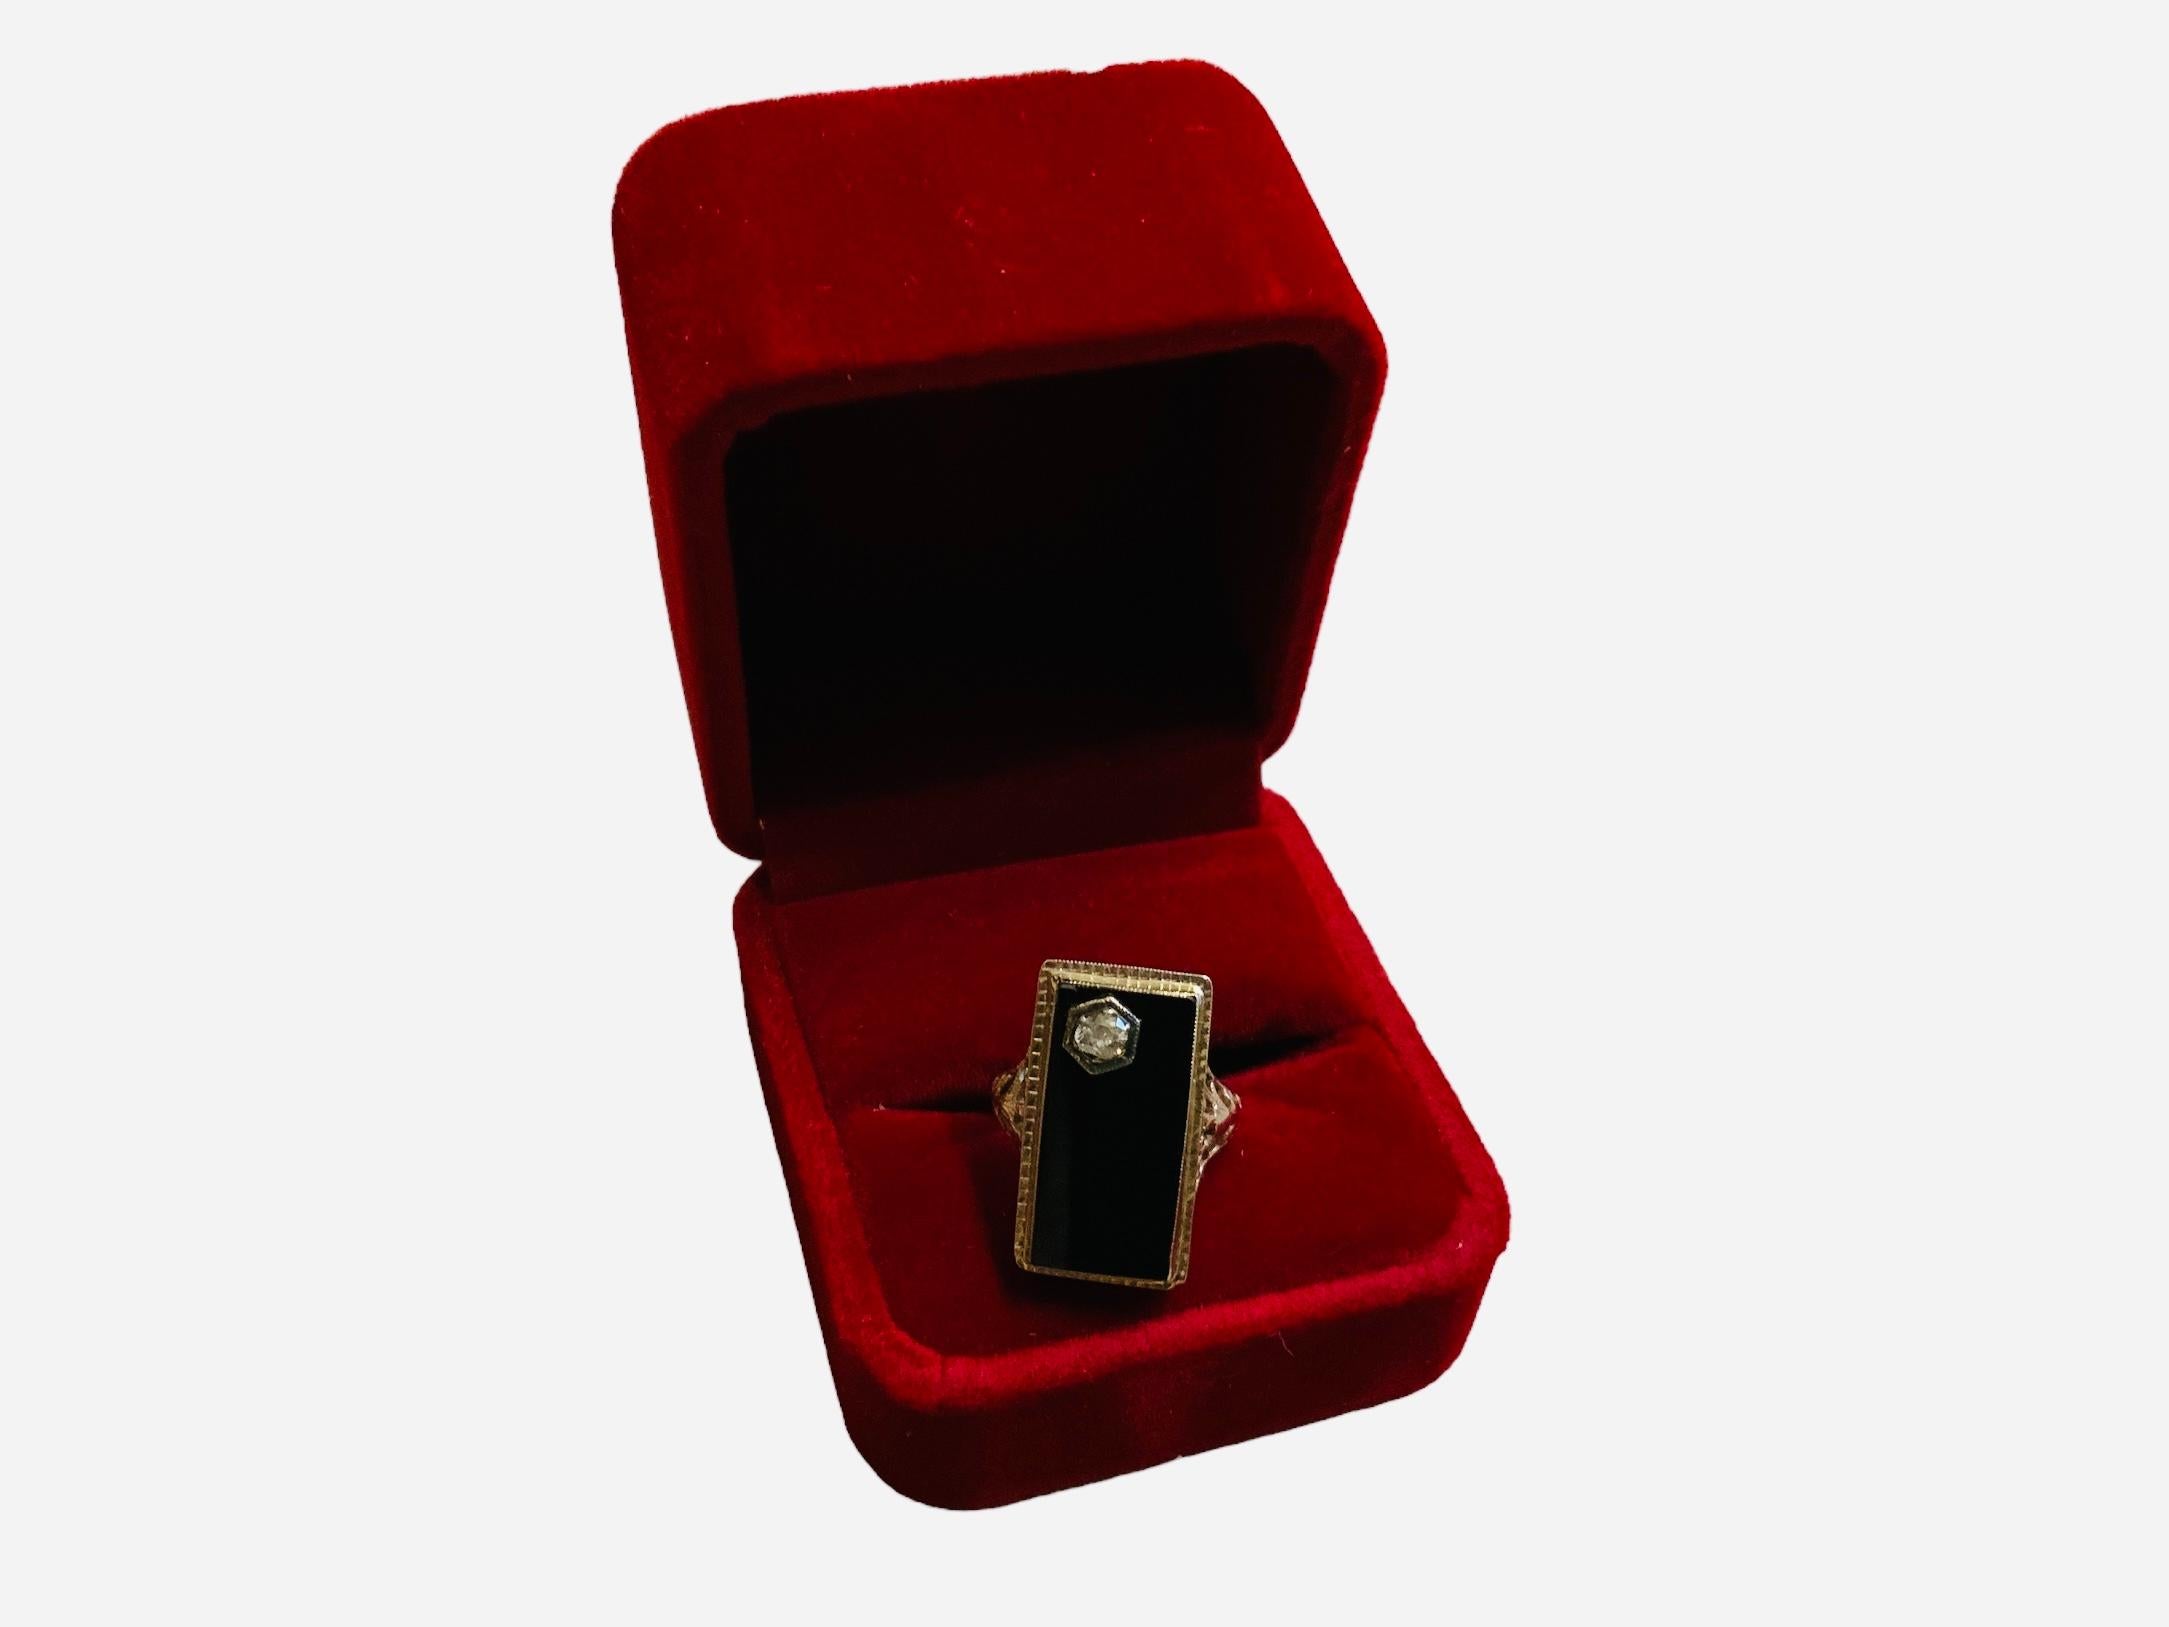 This is an Art Deco 14K white gold, diamond and onyx cocktail ring. It depicts a rectangular black onyx top in white gold bezel setting. The onyx has a reeded gold frame. A round cut diamond on prong setting embellishes one of the corner of the